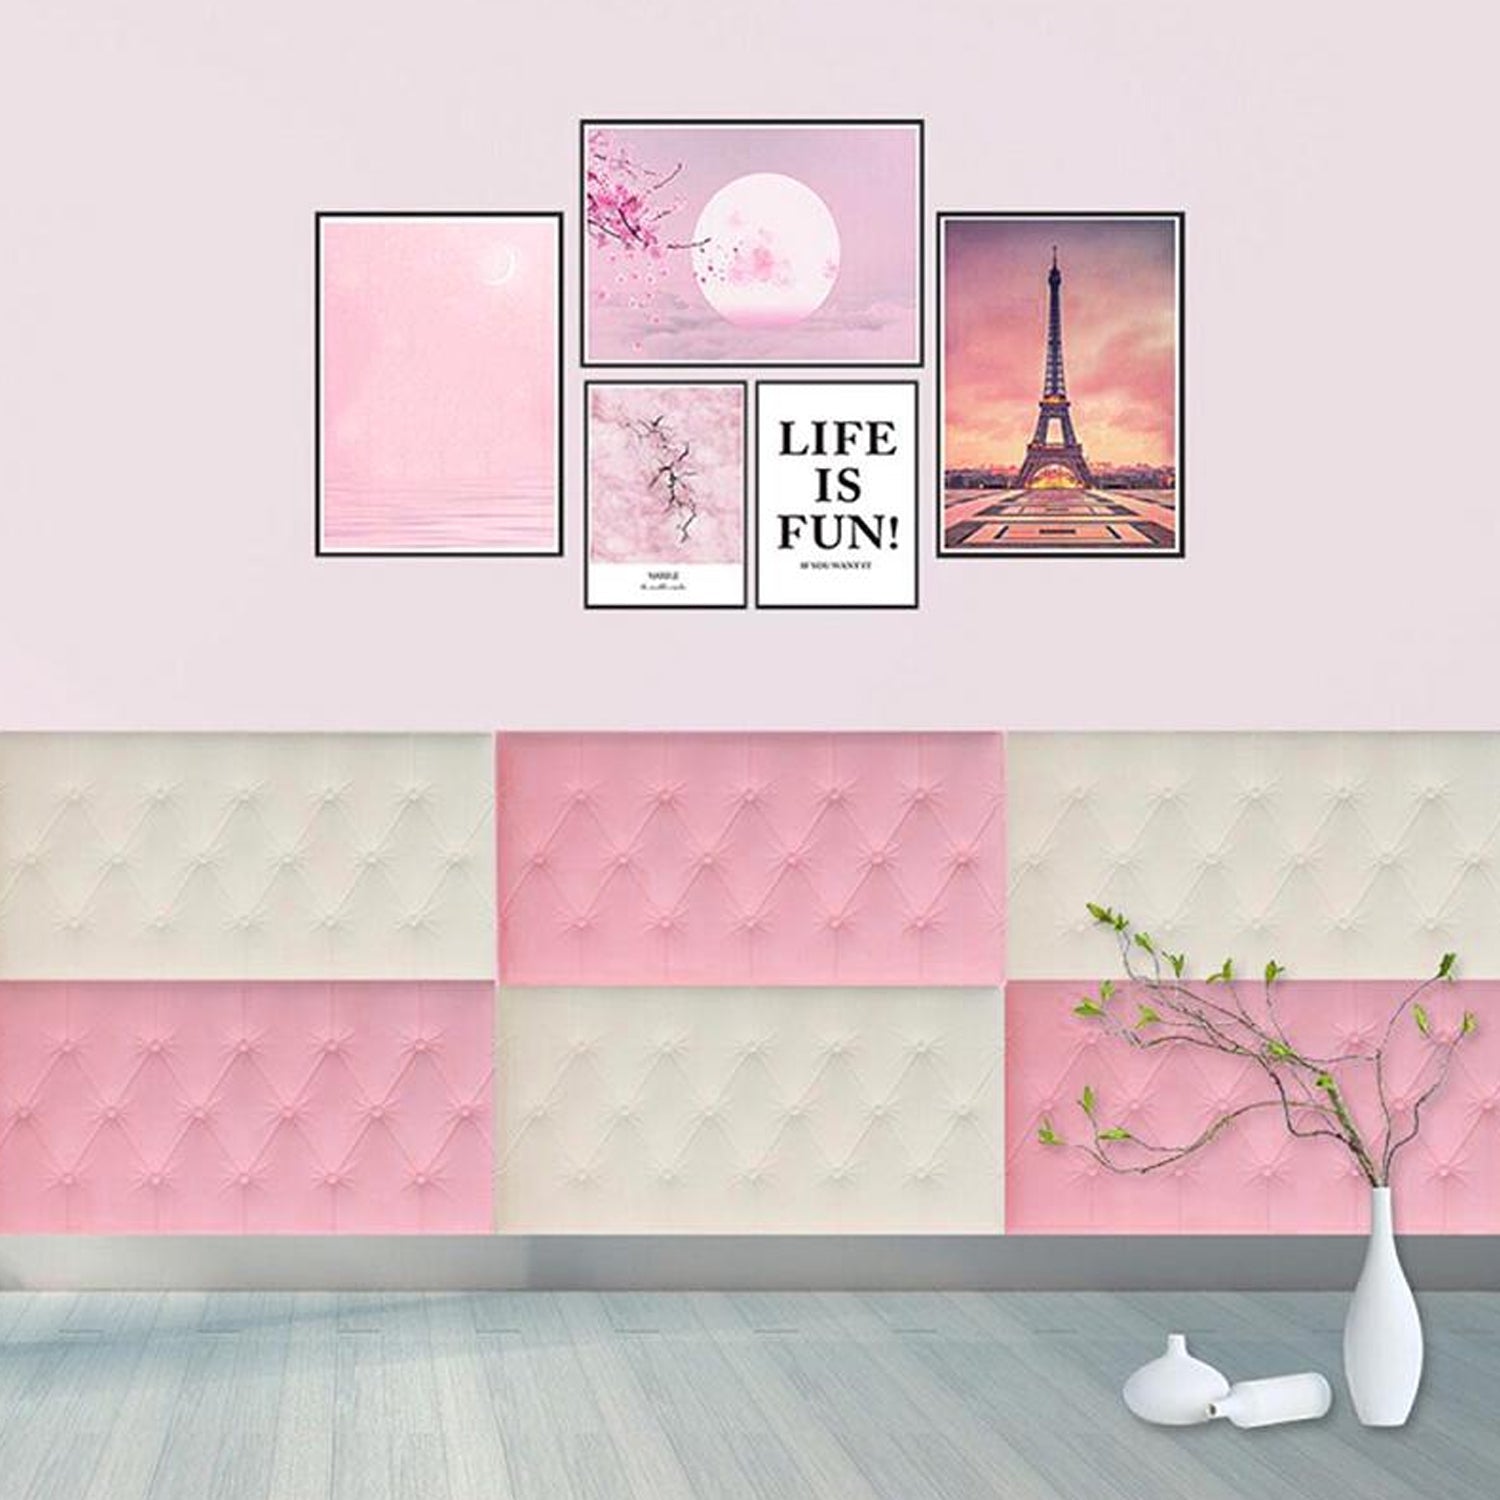 9039 Pink 3D Adhesive wallpaper for  living Room. Room Wall Paper Home Decor Self Adhesive Wallpaper DeoDap